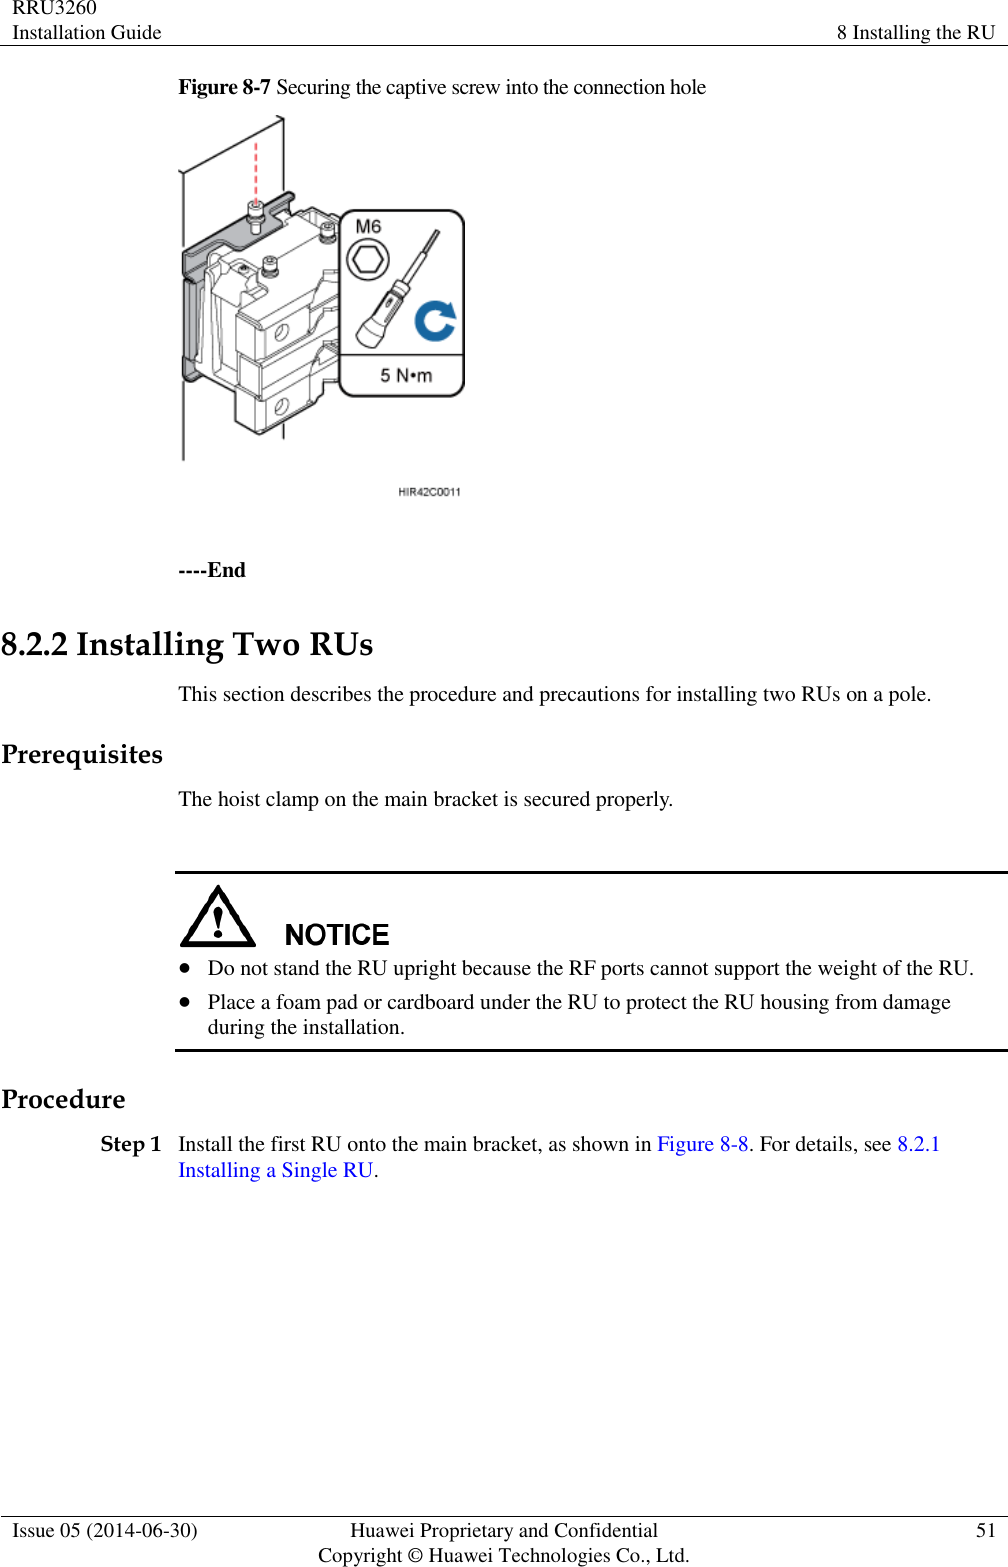 RRU3260 Installation Guide 8 Installing the RU  Issue 05 (2014-06-30) Huawei Proprietary and Confidential                                     Copyright © Huawei Technologies Co., Ltd. 51  Figure 8-7 Securing the captive screw into the connection hole   ----End 8.2.2 Installing Two RUs This section describes the procedure and precautions for installing two RUs on a pole. Prerequisites The hoist clamp on the main bracket is secured properly.    Do not stand the RU upright because the RF ports cannot support the weight of the RU.  Place a foam pad or cardboard under the RU to protect the RU housing from damage during the installation. Procedure Step 1 Install the first RU onto the main bracket, as shown in Figure 8-8. For details, see 8.2.1 Installing a Single RU. 